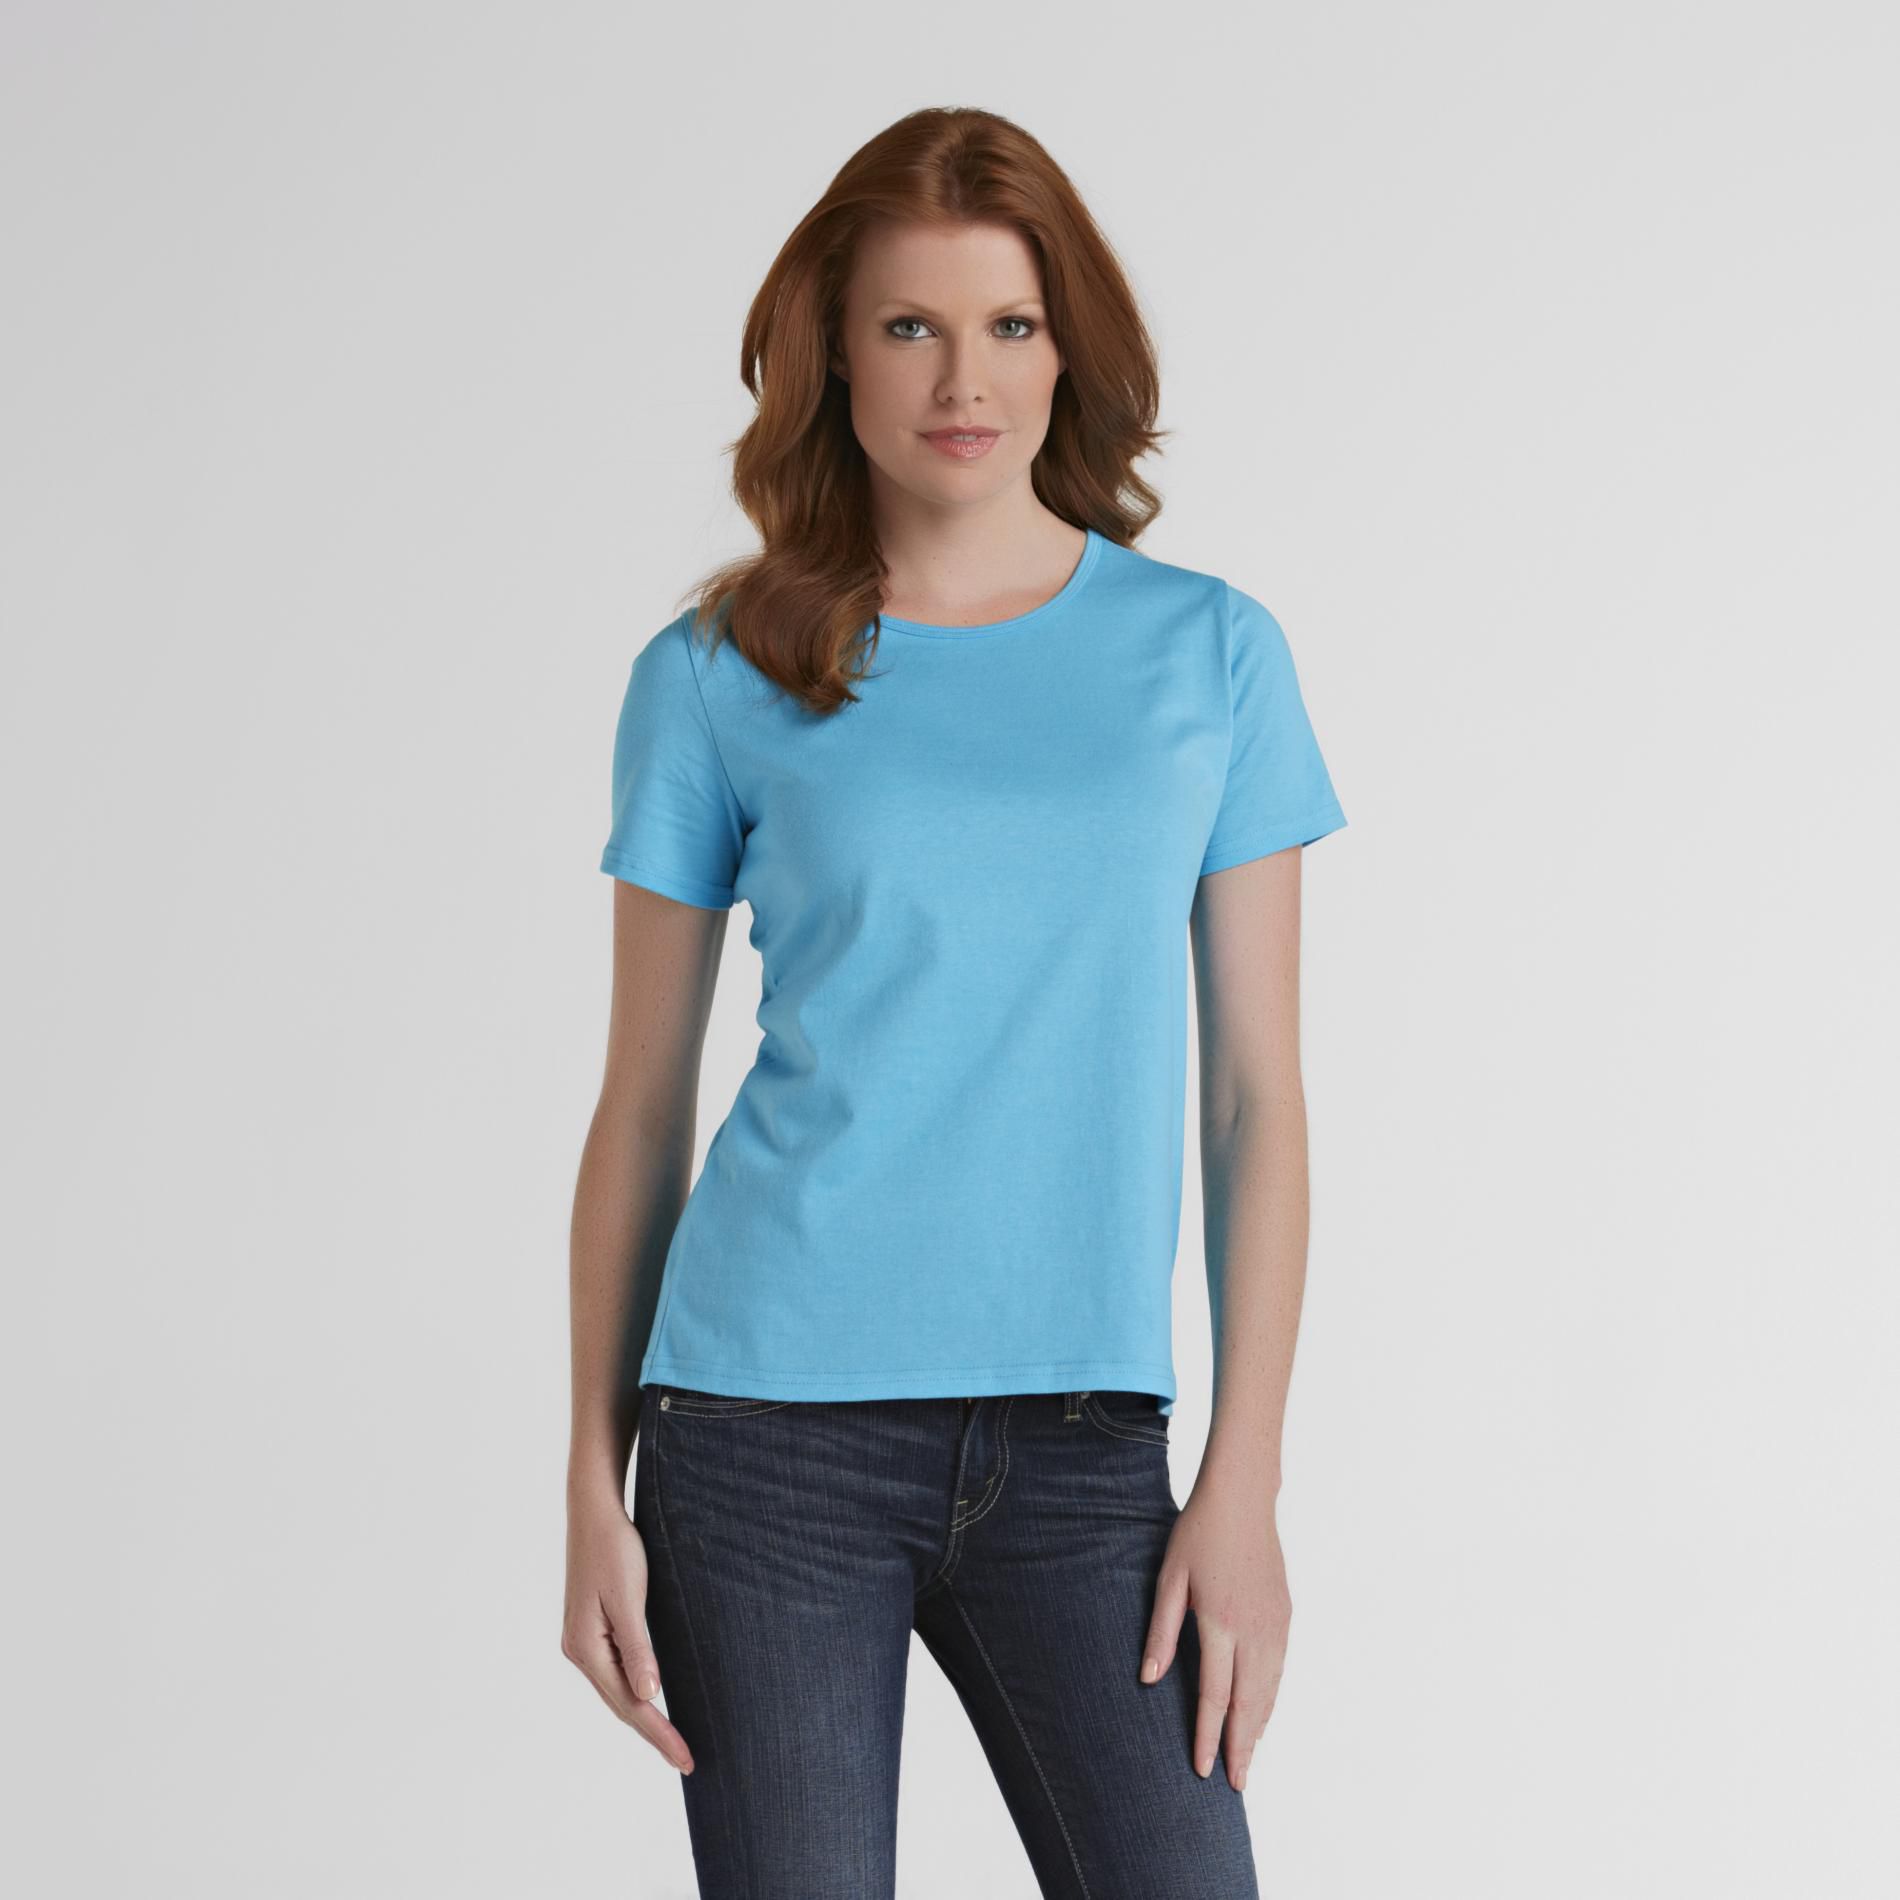 Basic Editions Women's Relaxed Fit T-Shirt